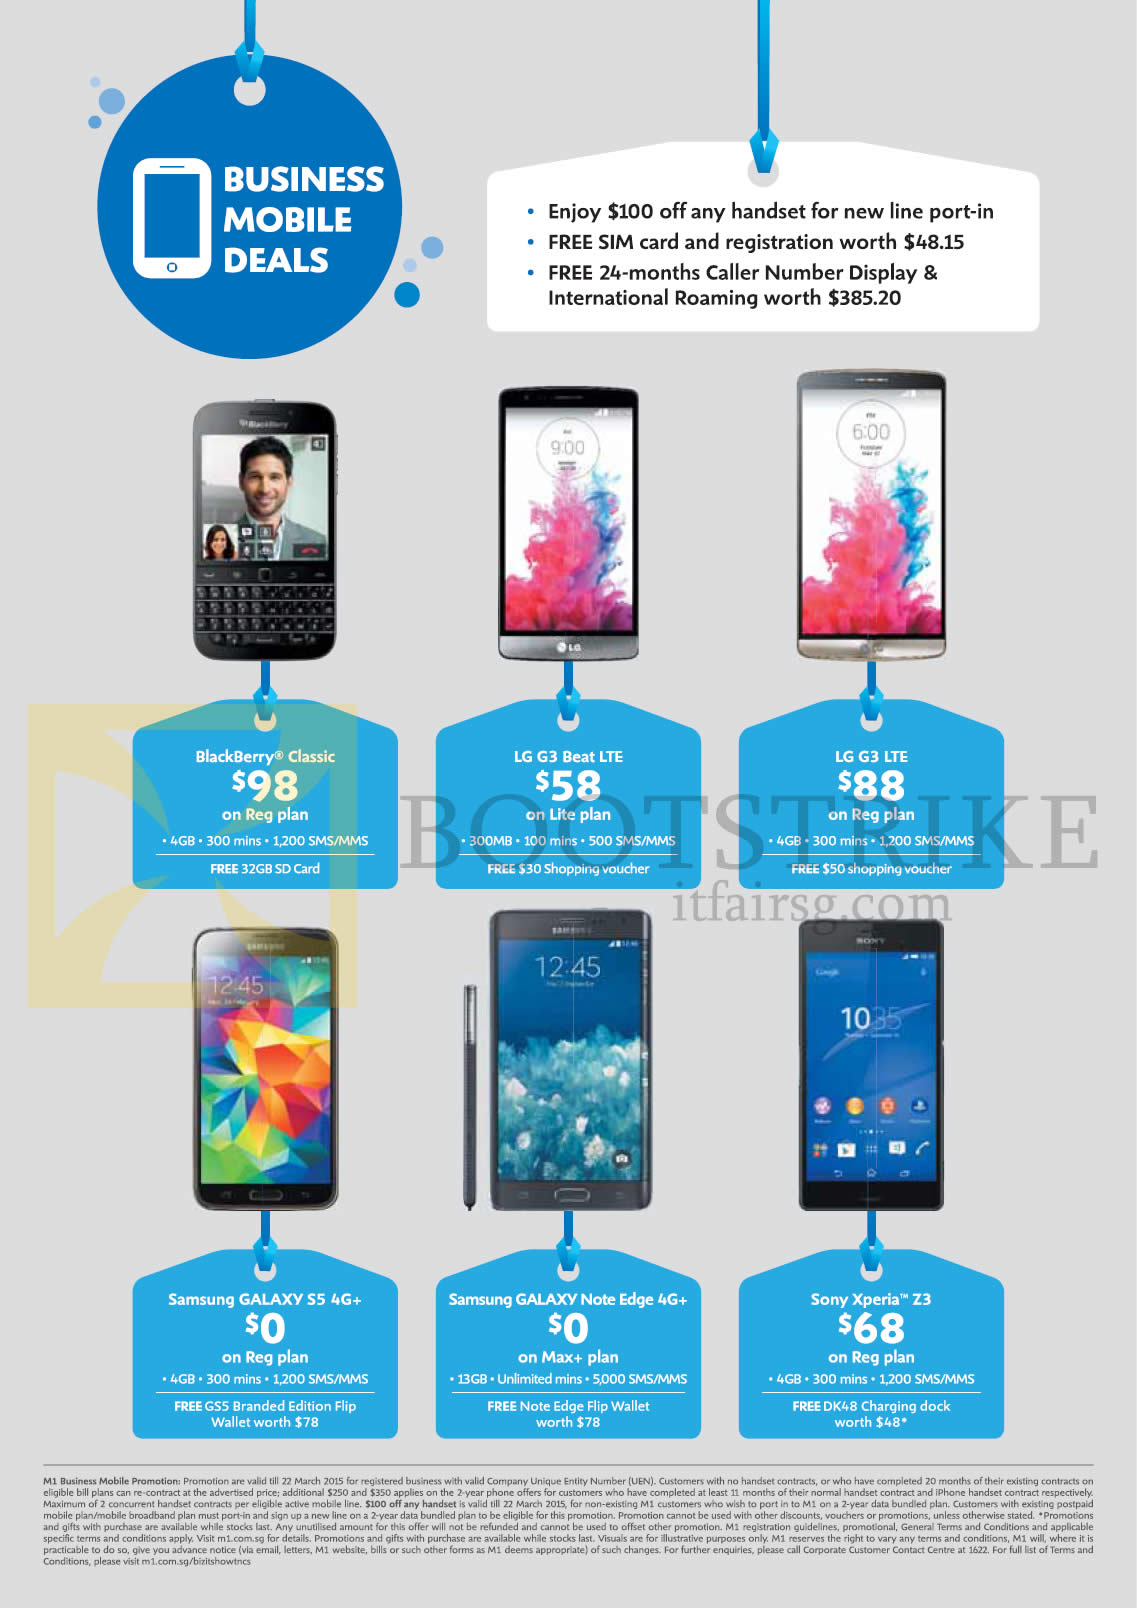 IT SHOW 2015 price list image brochure of M1 Business Mobile Phones Blackberry Classic, LG G3, Beat, Samsung Galaxy Galaxy S5, Note Edge, Sony Xperia Z3